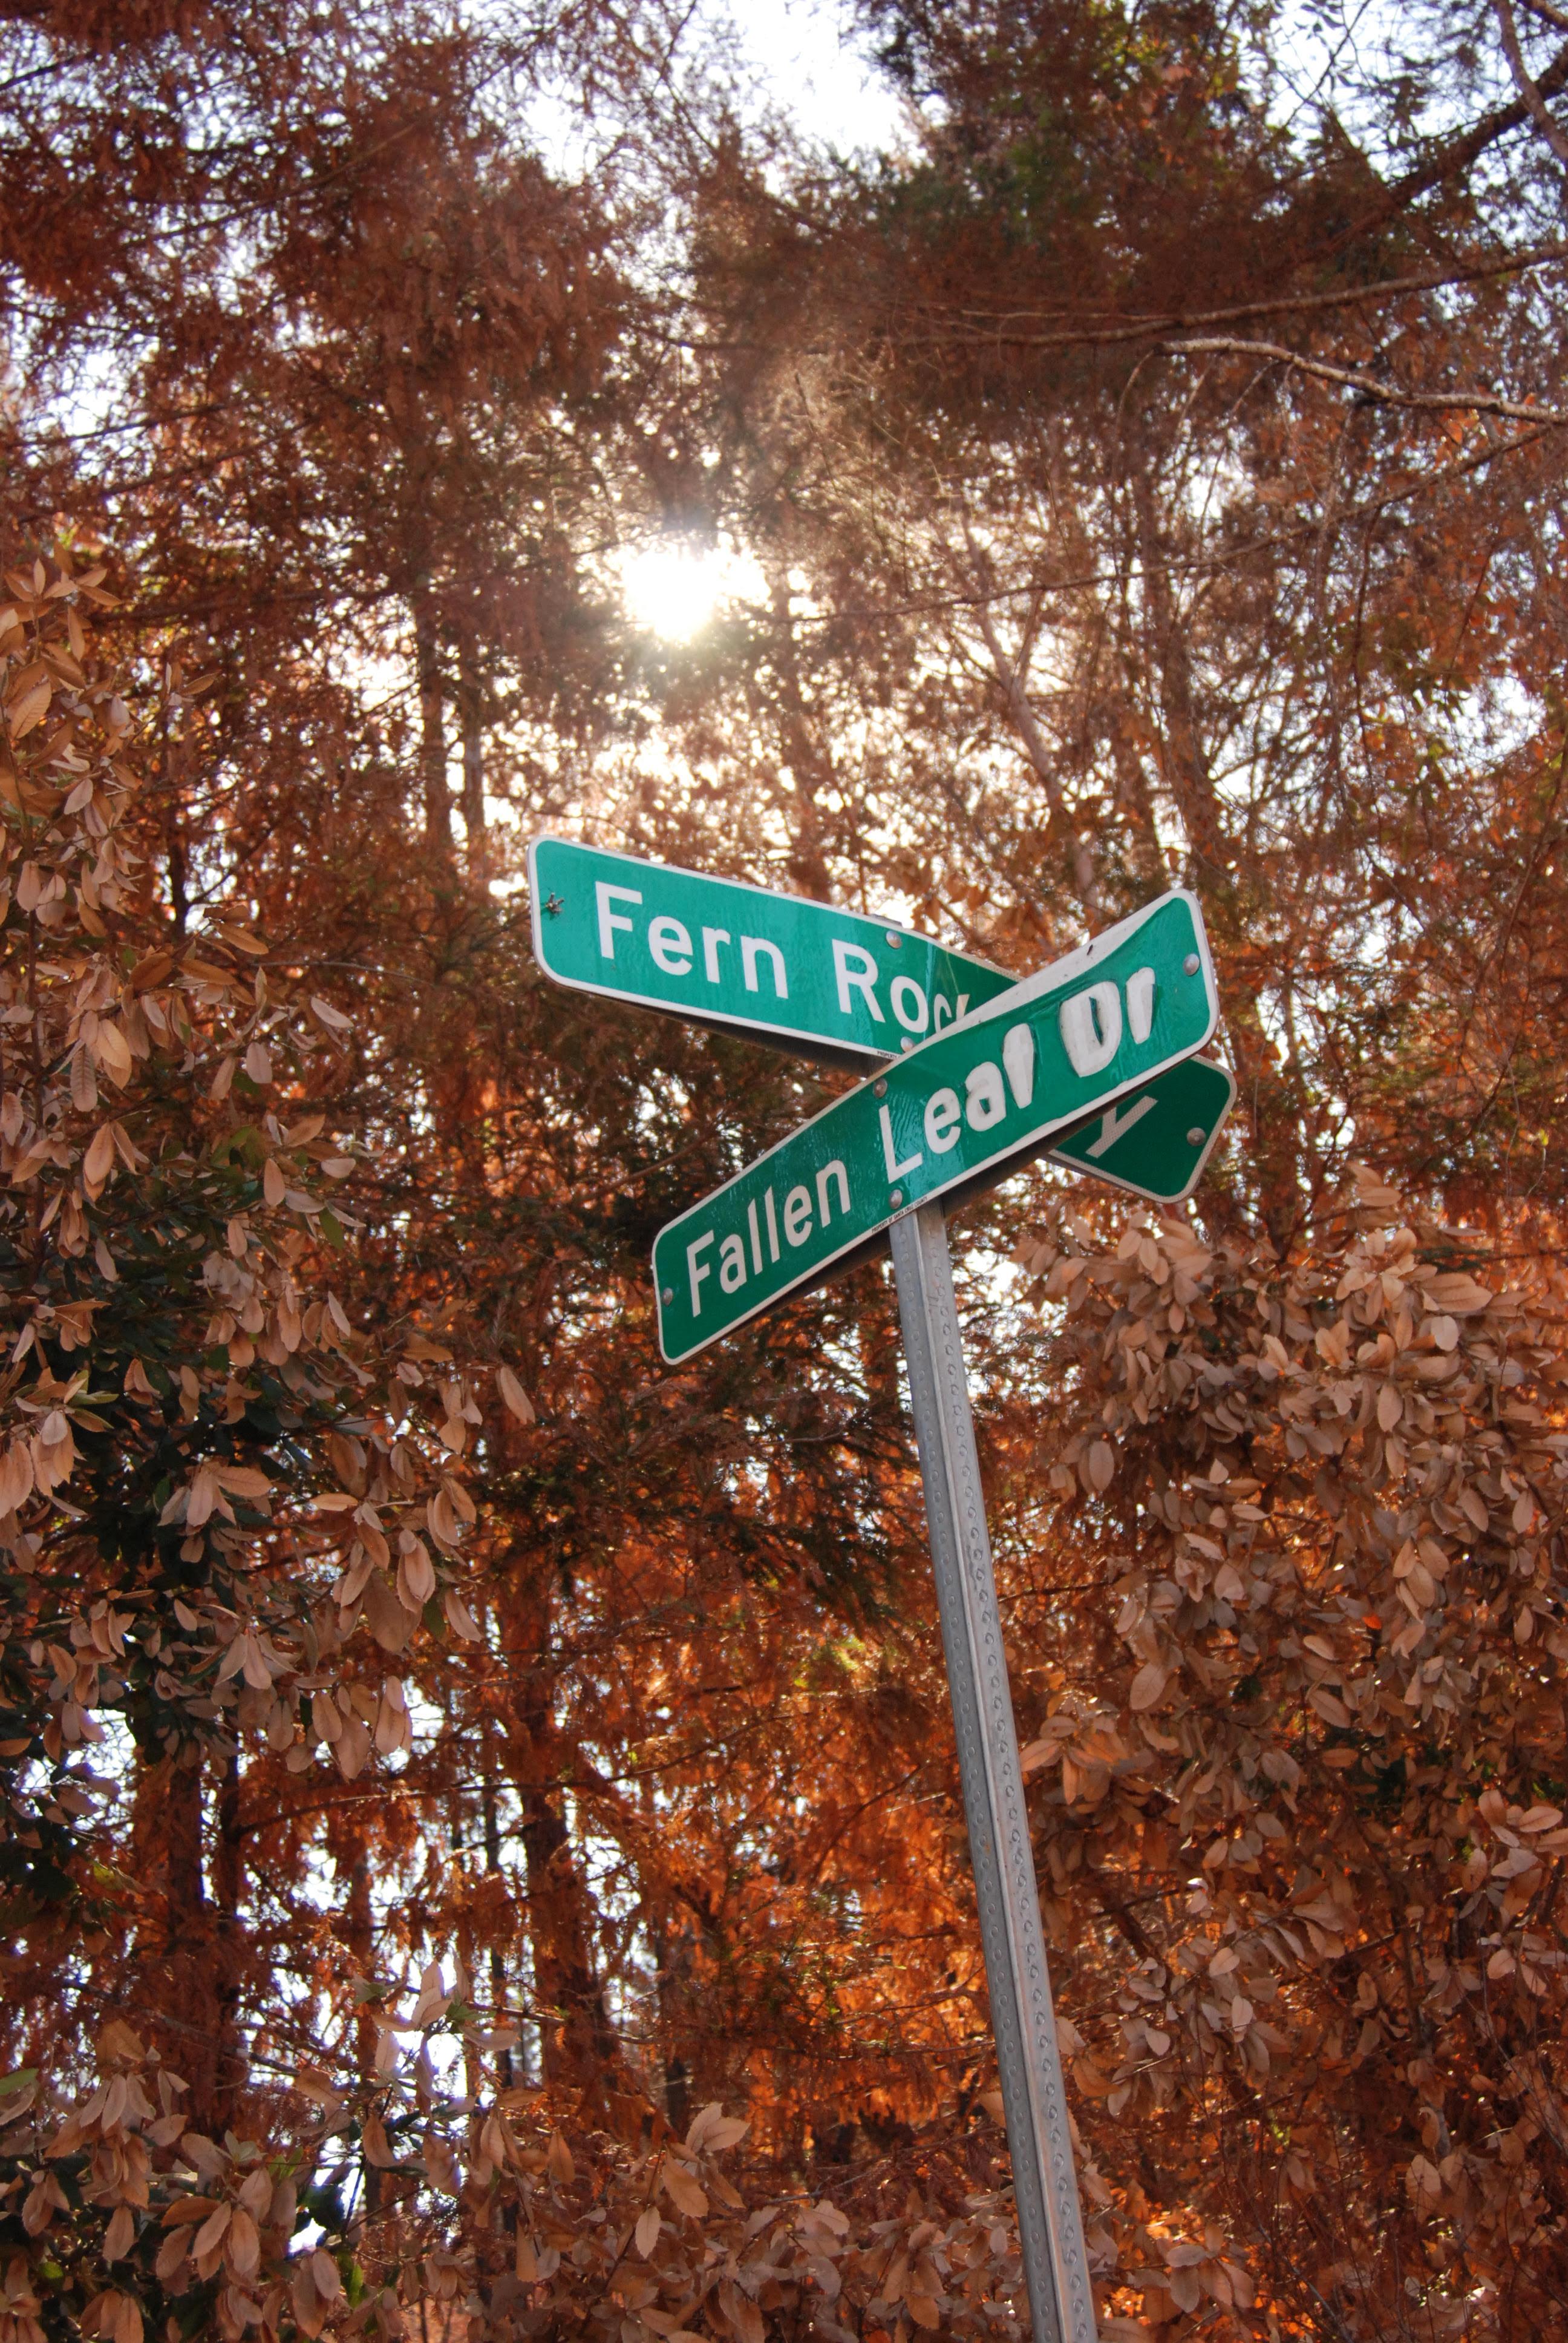 Photo: street sign intersection agains burned trees